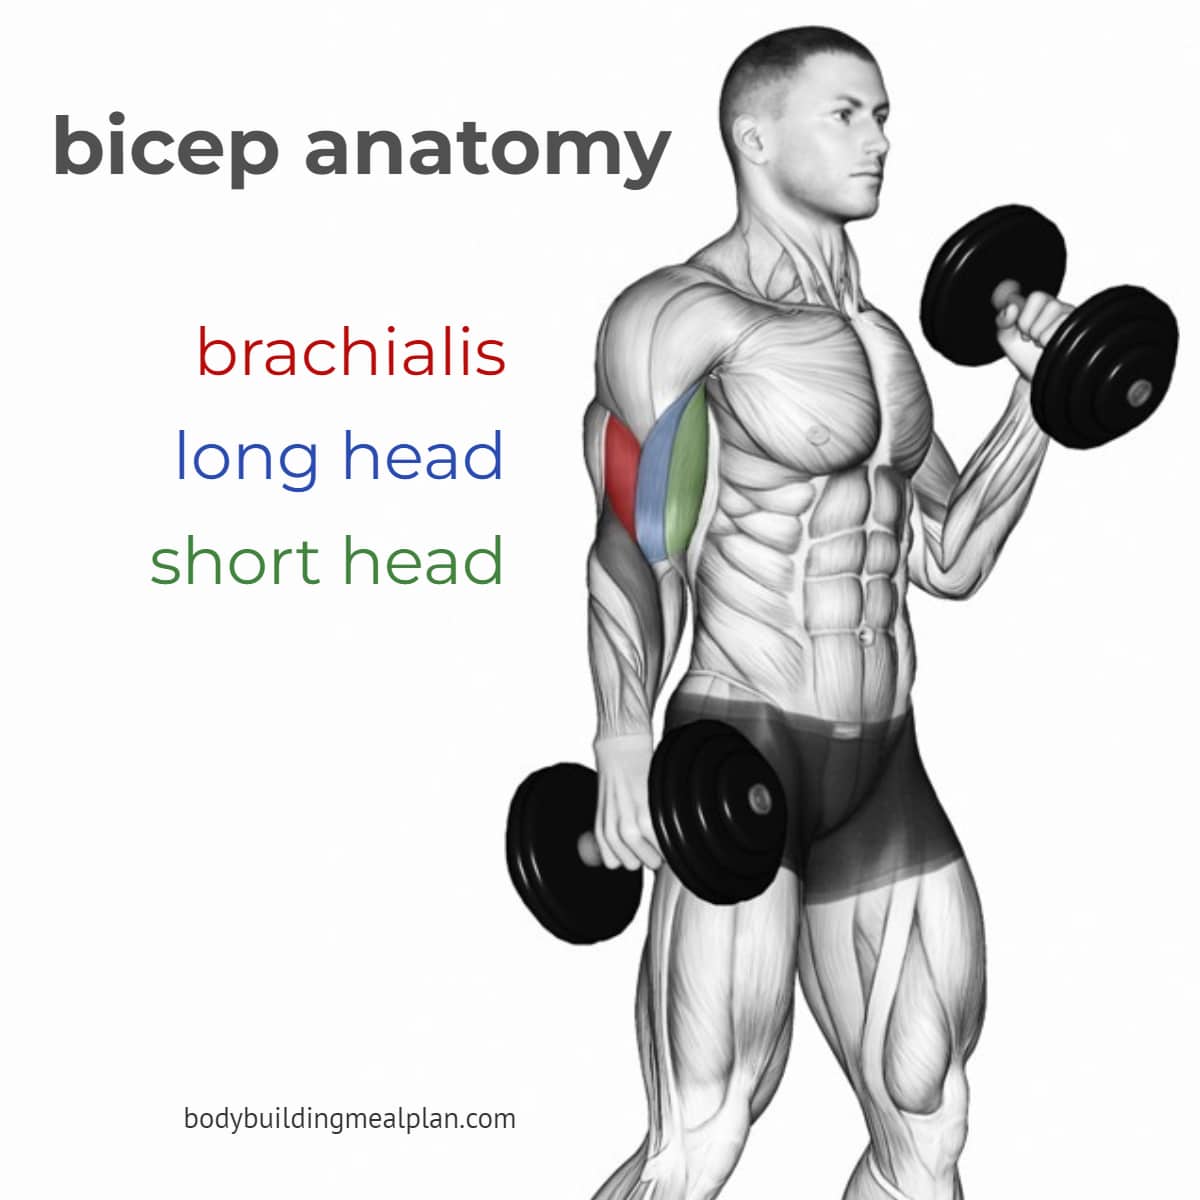 Which exercises effectively work the long-head, short-head and